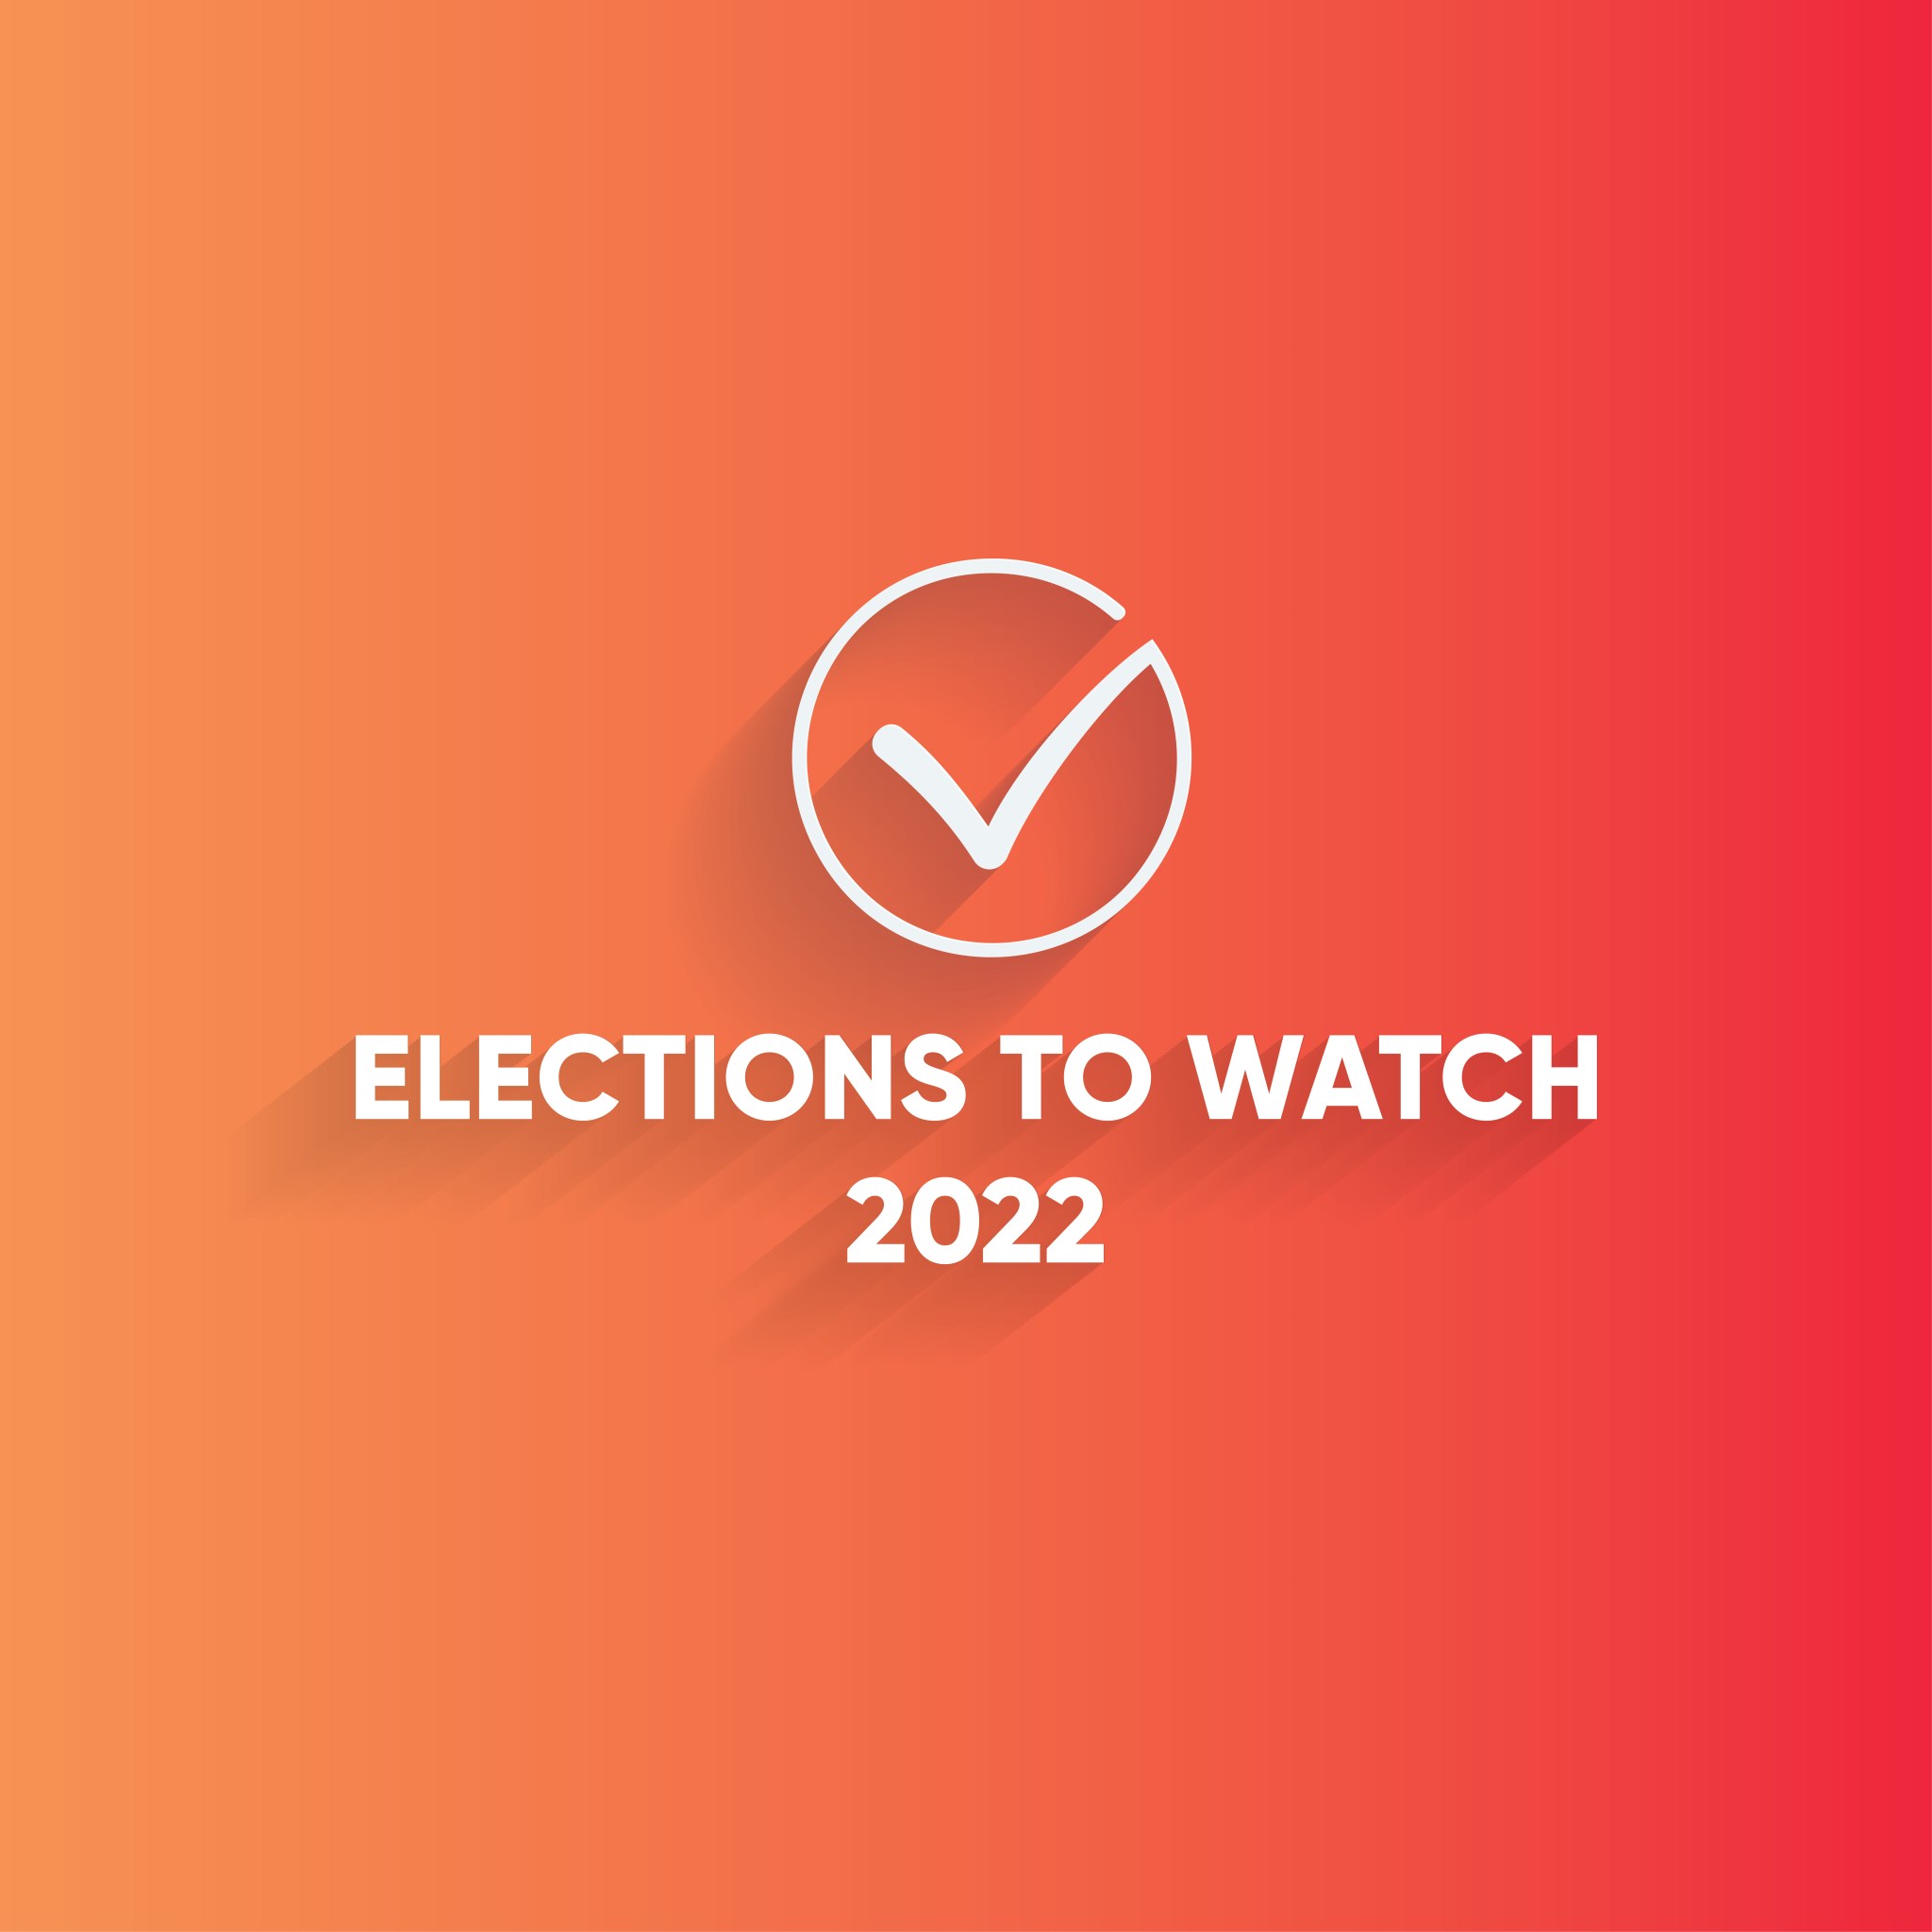 Elections to Watch 2022